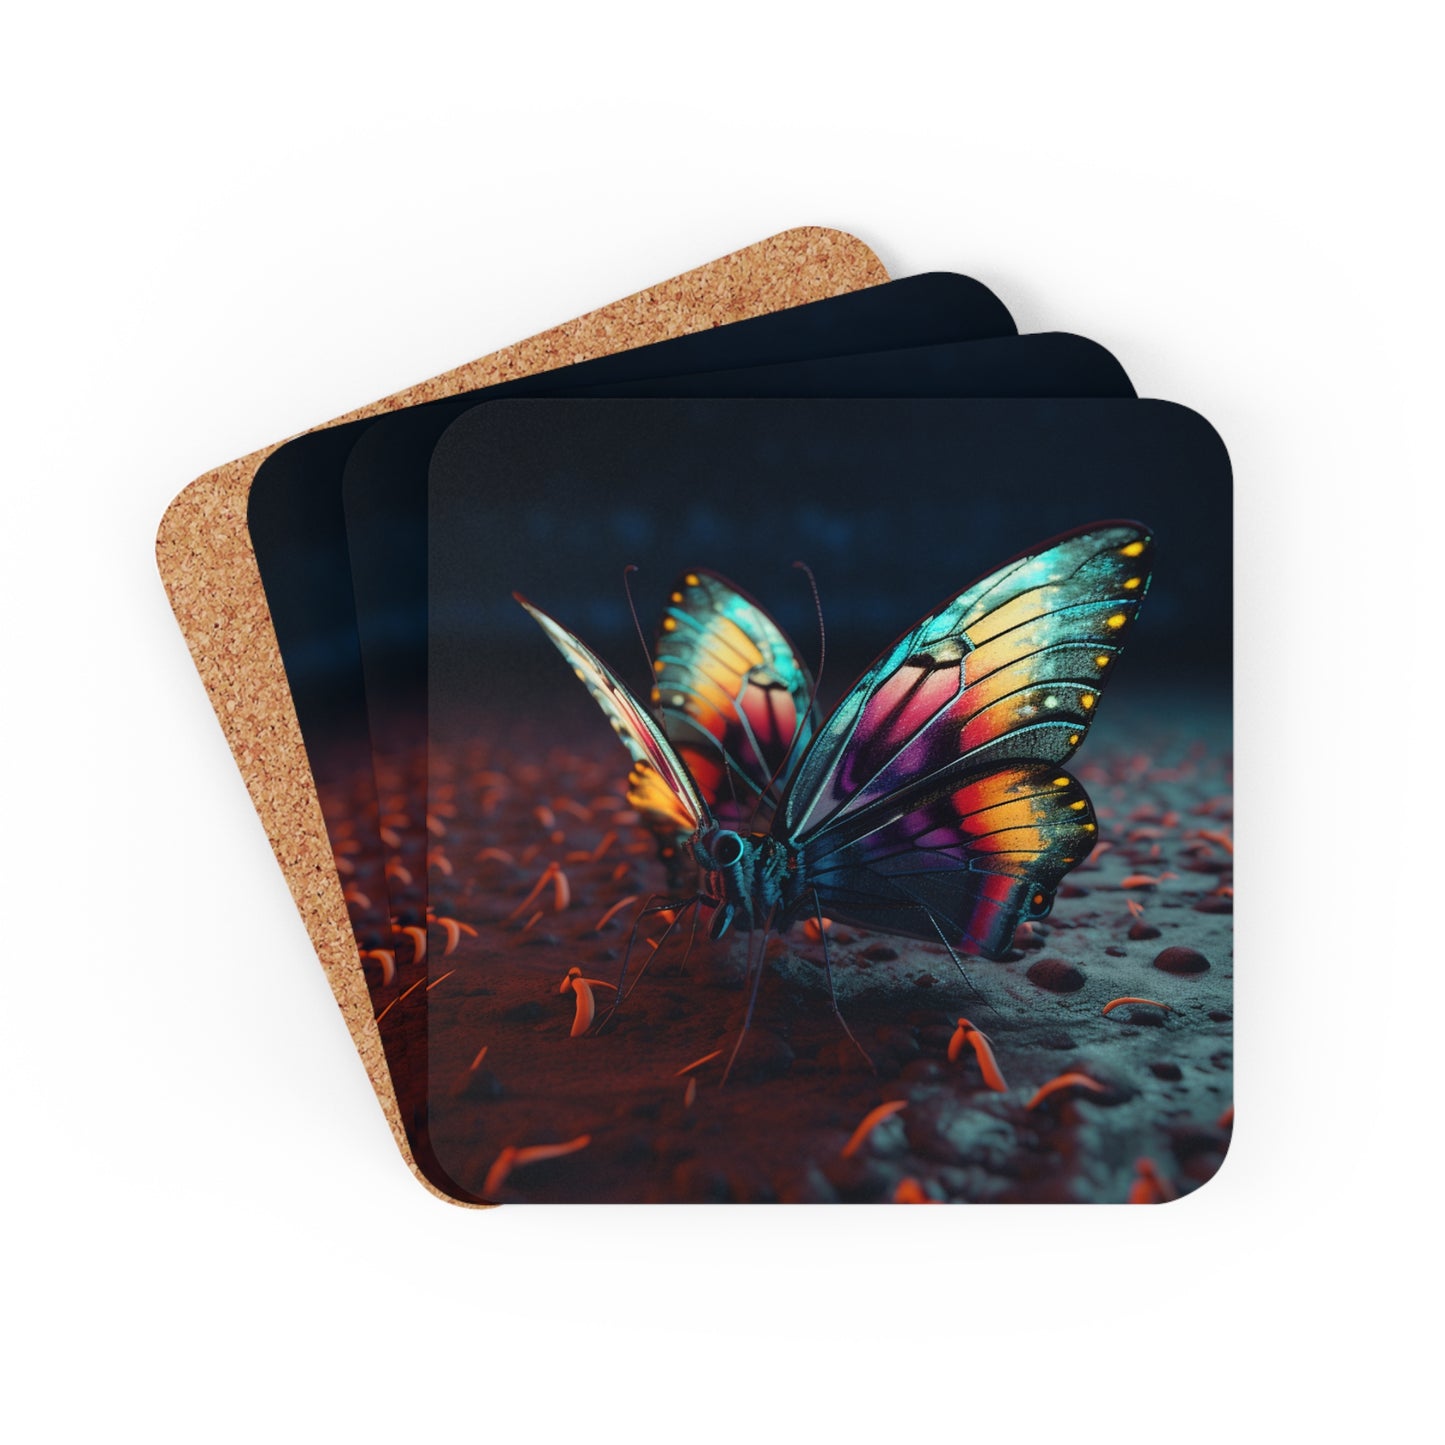 Corkwood Coaster Set Hyper Colorful Butterfly Macro 1